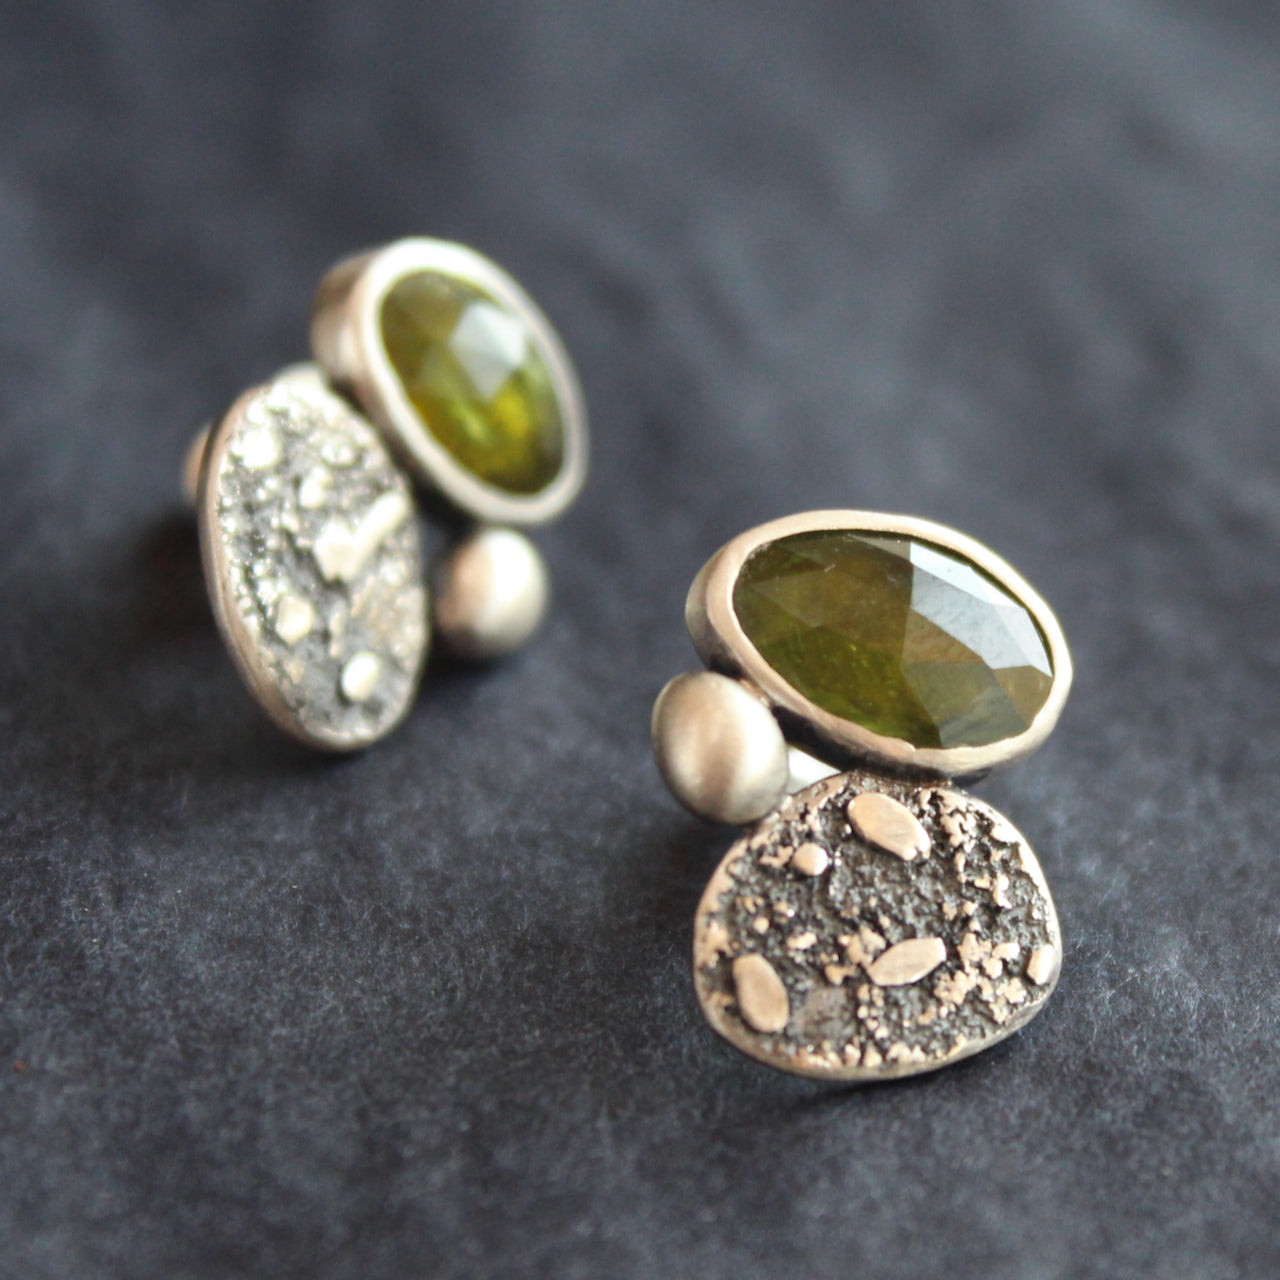 a pair of silver stud earrings with a green stone set in silver by Carin Lindberg jewellery designer 